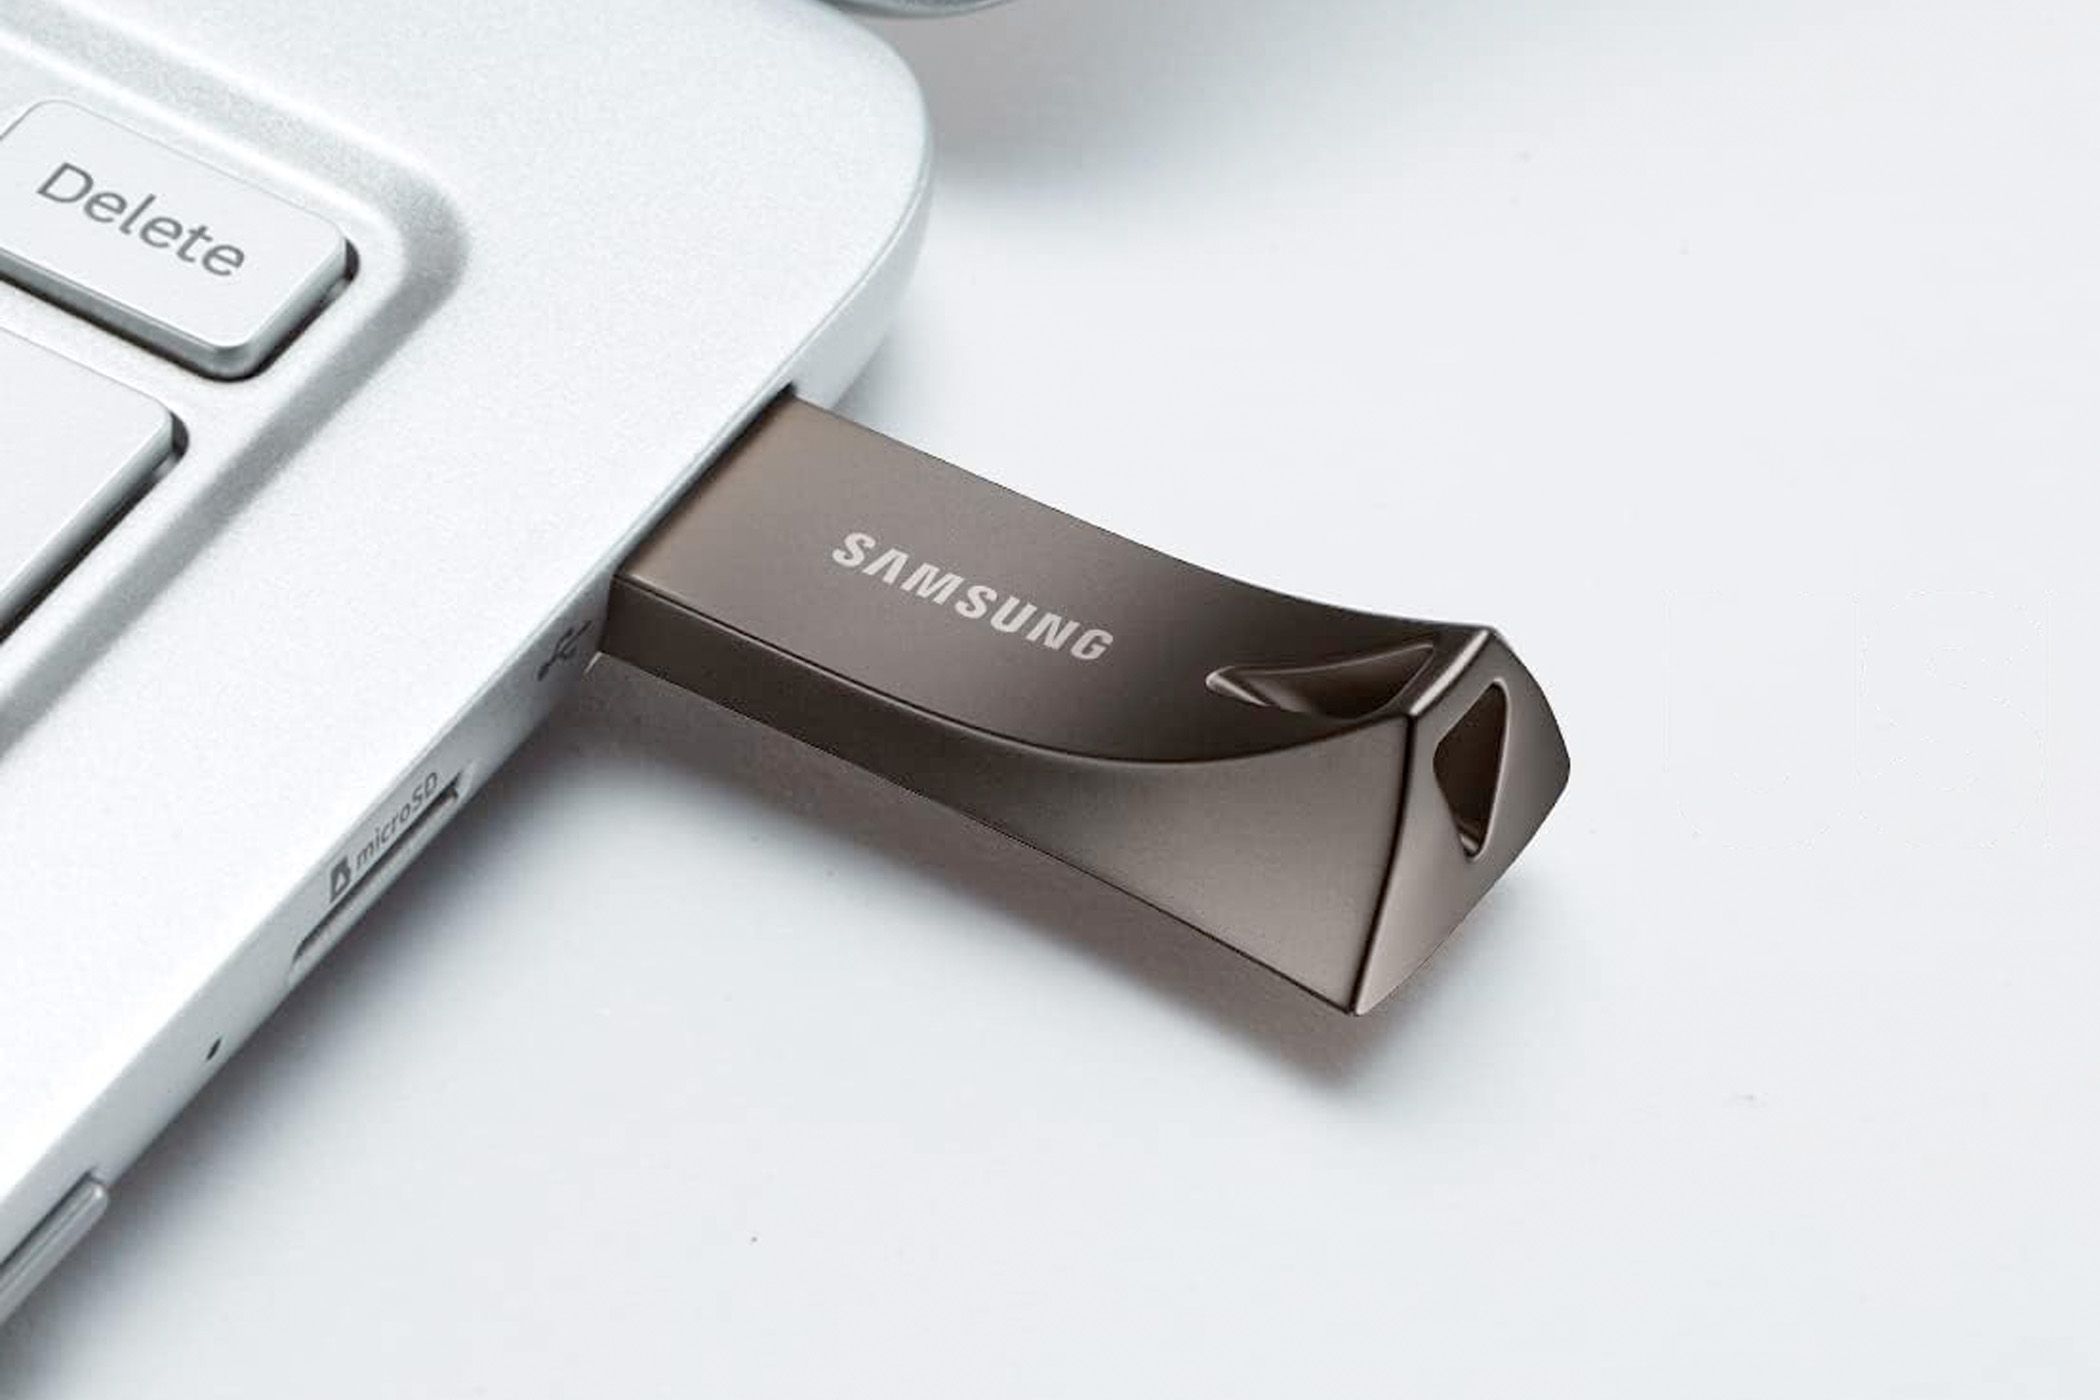 Photo of a Samsung flash drive plugged into a laptop.